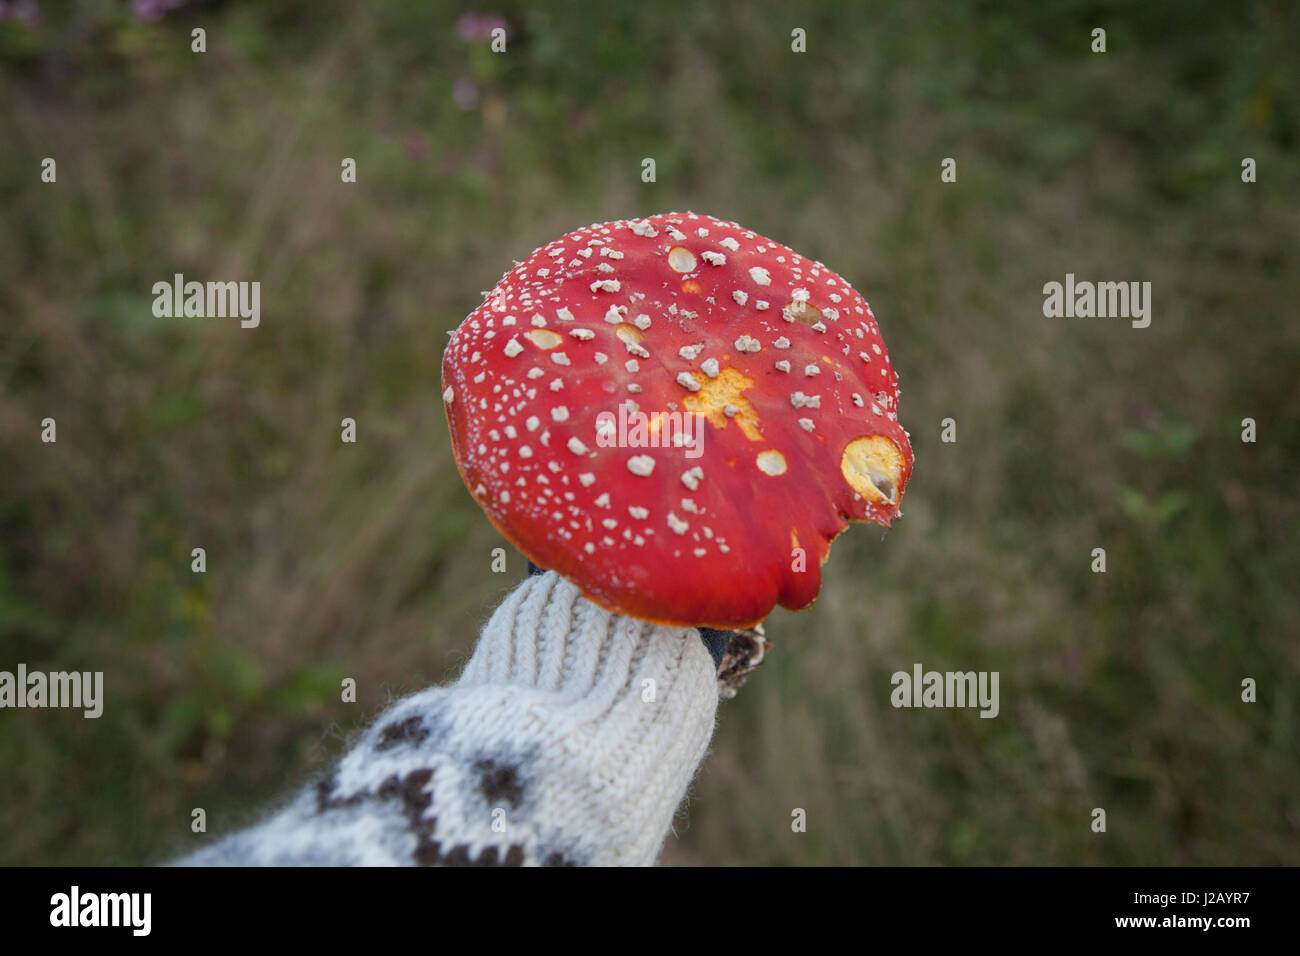 Cropped image of hand holding fly agaric mushroom Stock Photo